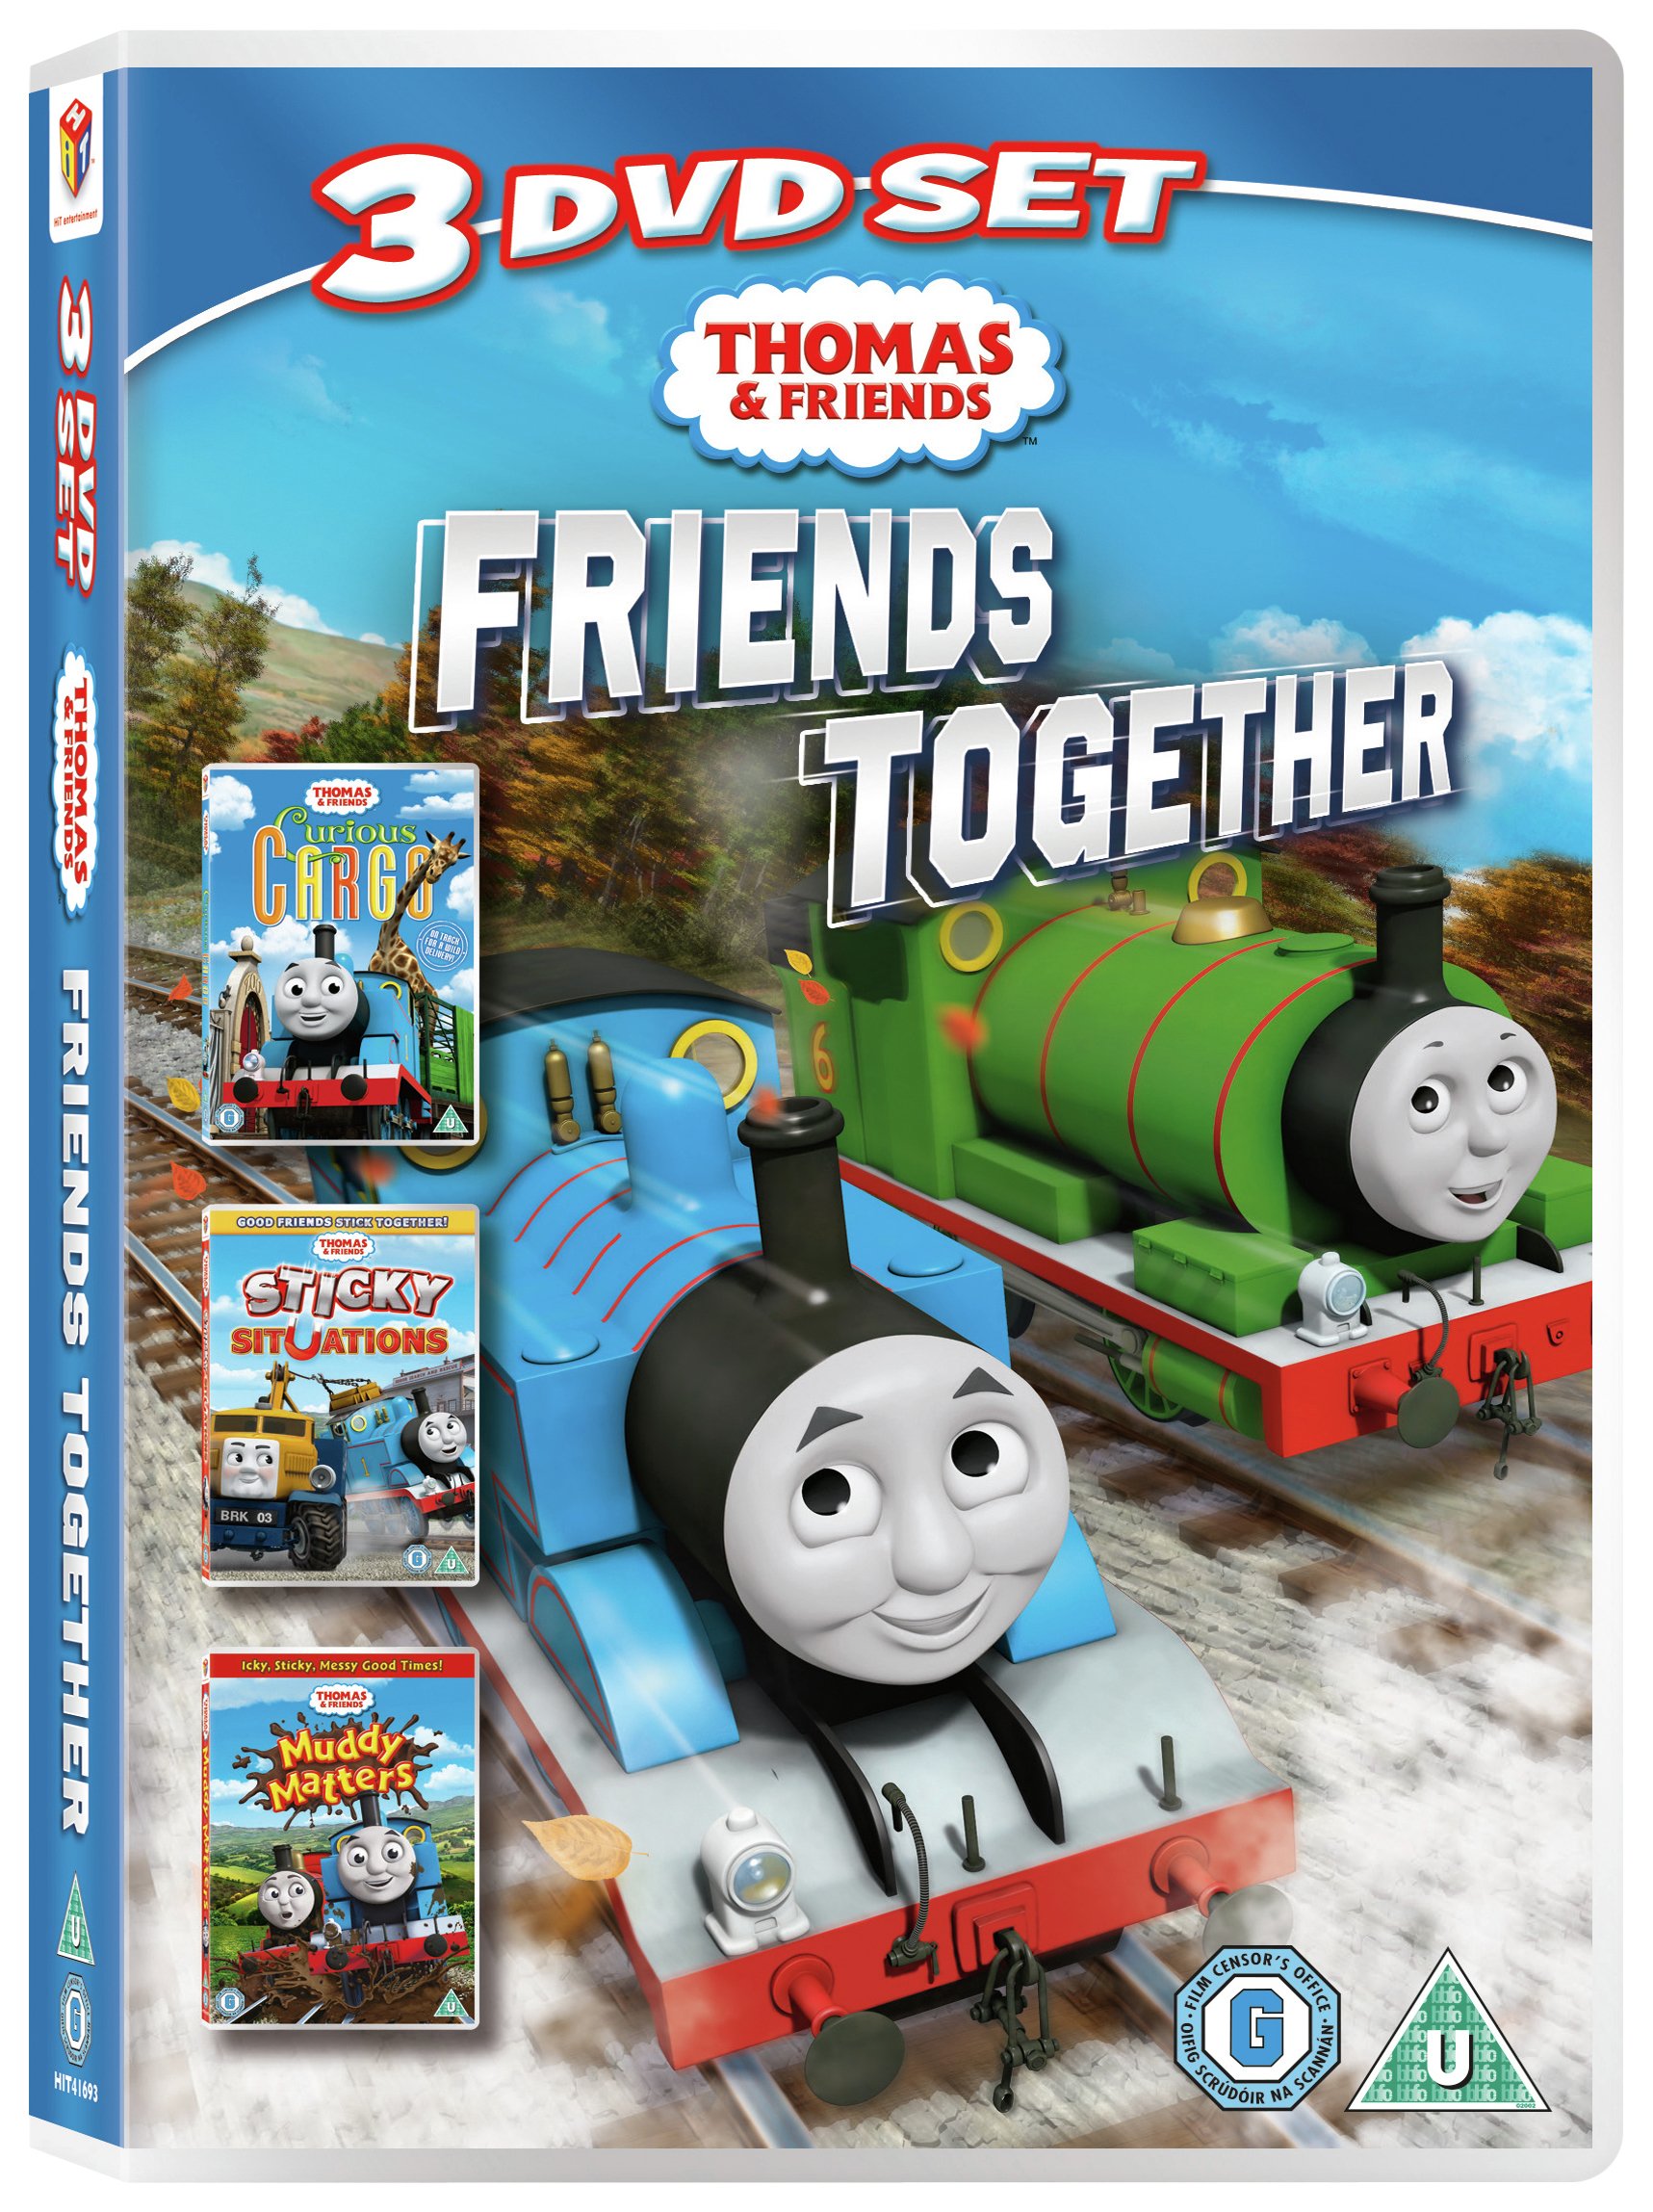 Thomas & Friends Together Triple DVD Pack.